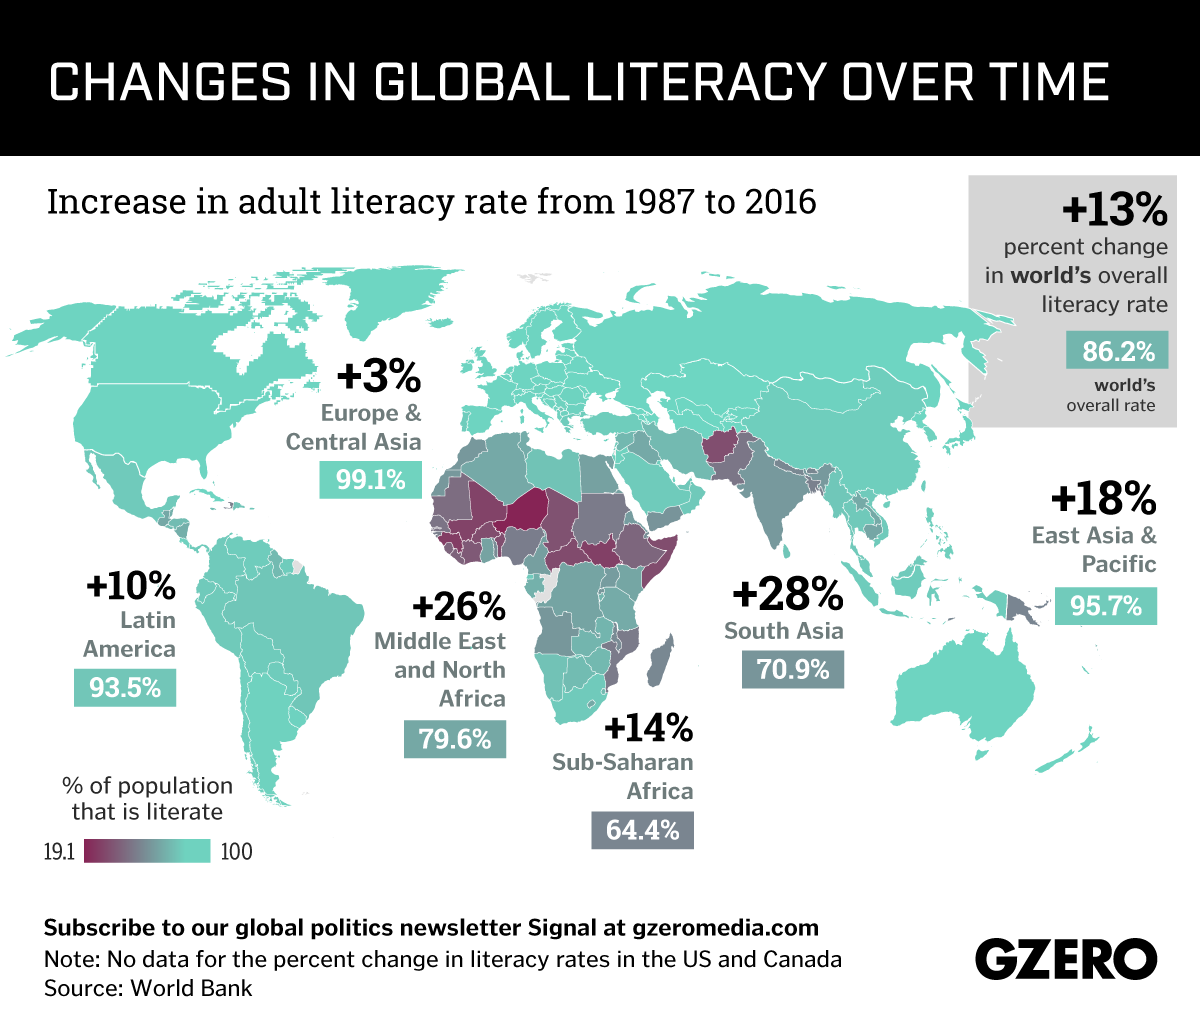 develop a hypothesis about why nations with low literacy rates